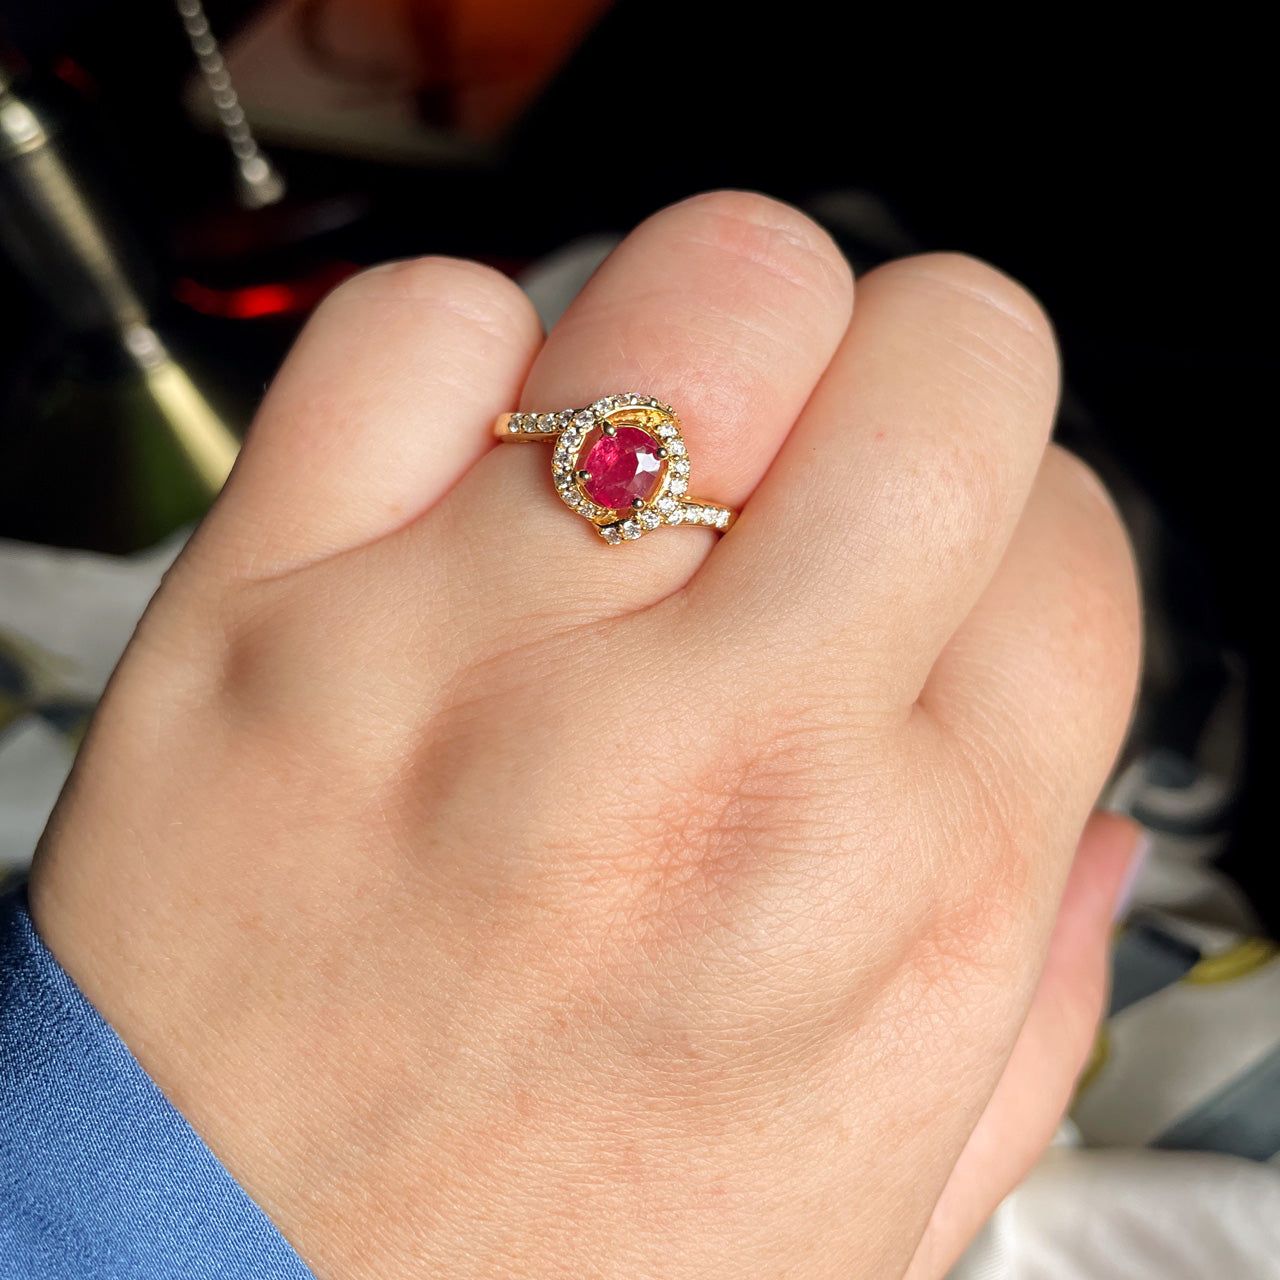 Renaissance-Inspired 22K Gold Ring with a 1.29-Ct Pigeon's Blood no heat  Burma Ruby